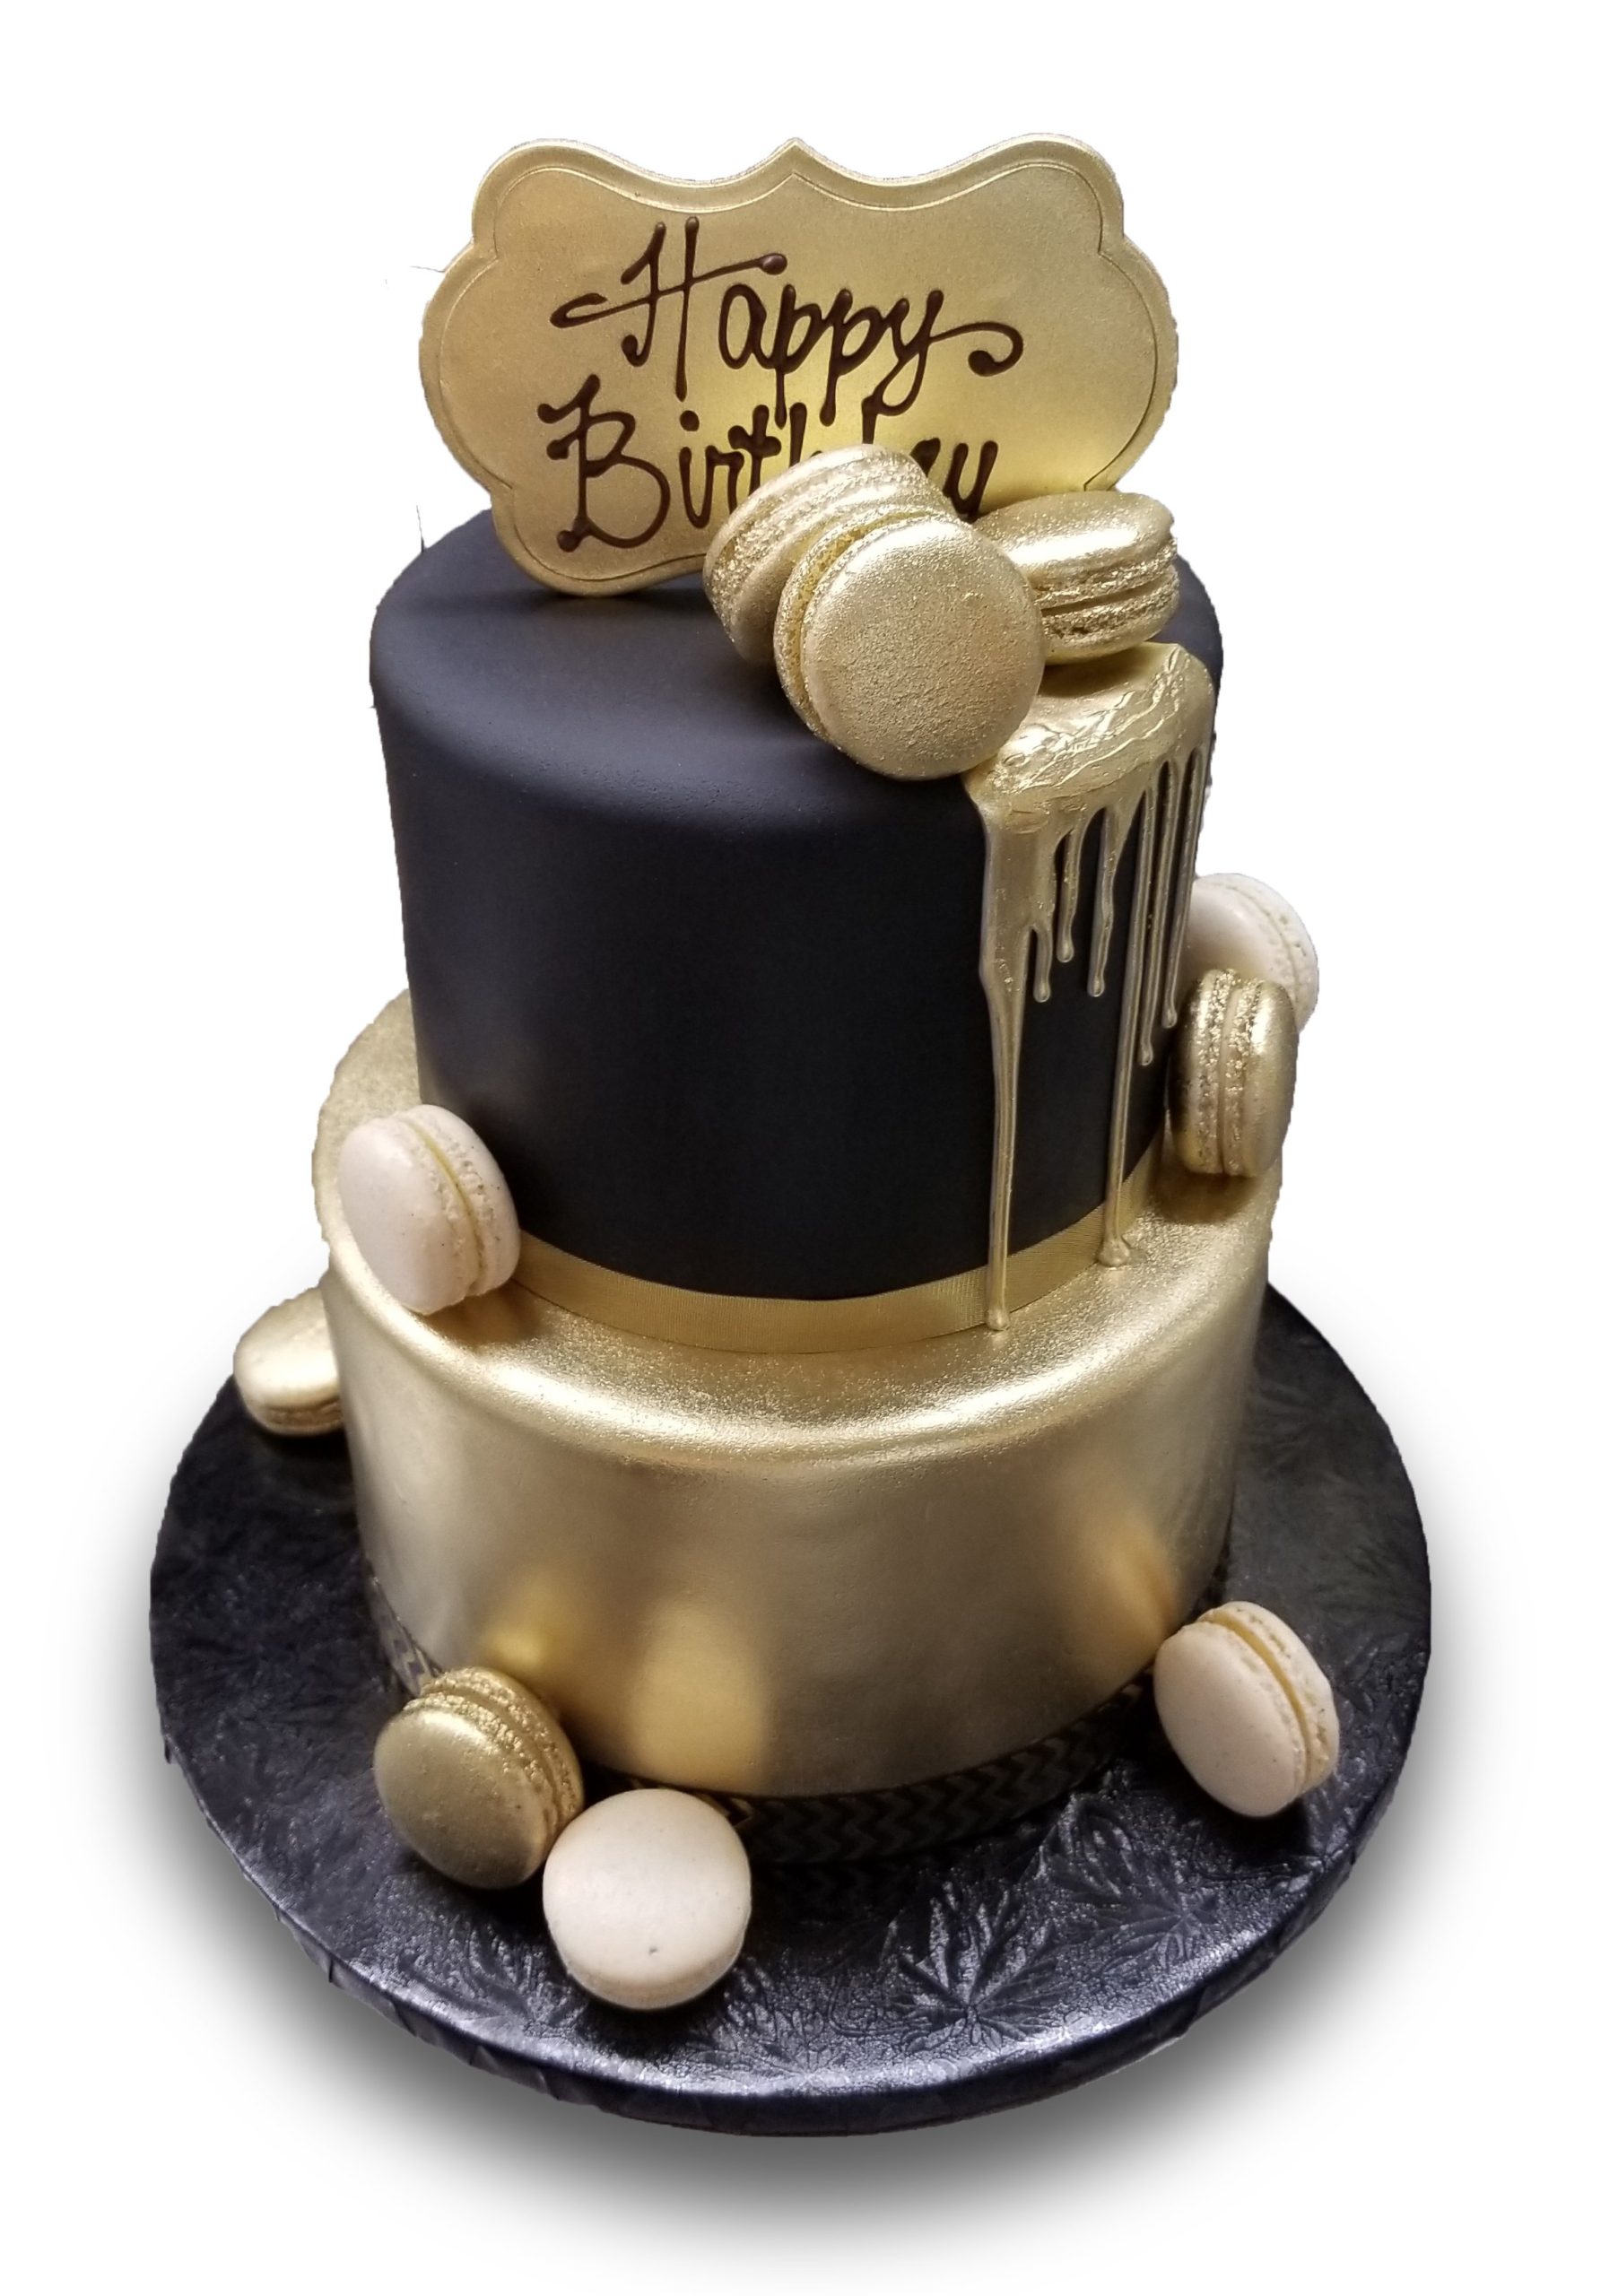 AB019. Two tiered black and gold fondant covered birthday cake with dripping gold chocolate and white and gold macarons